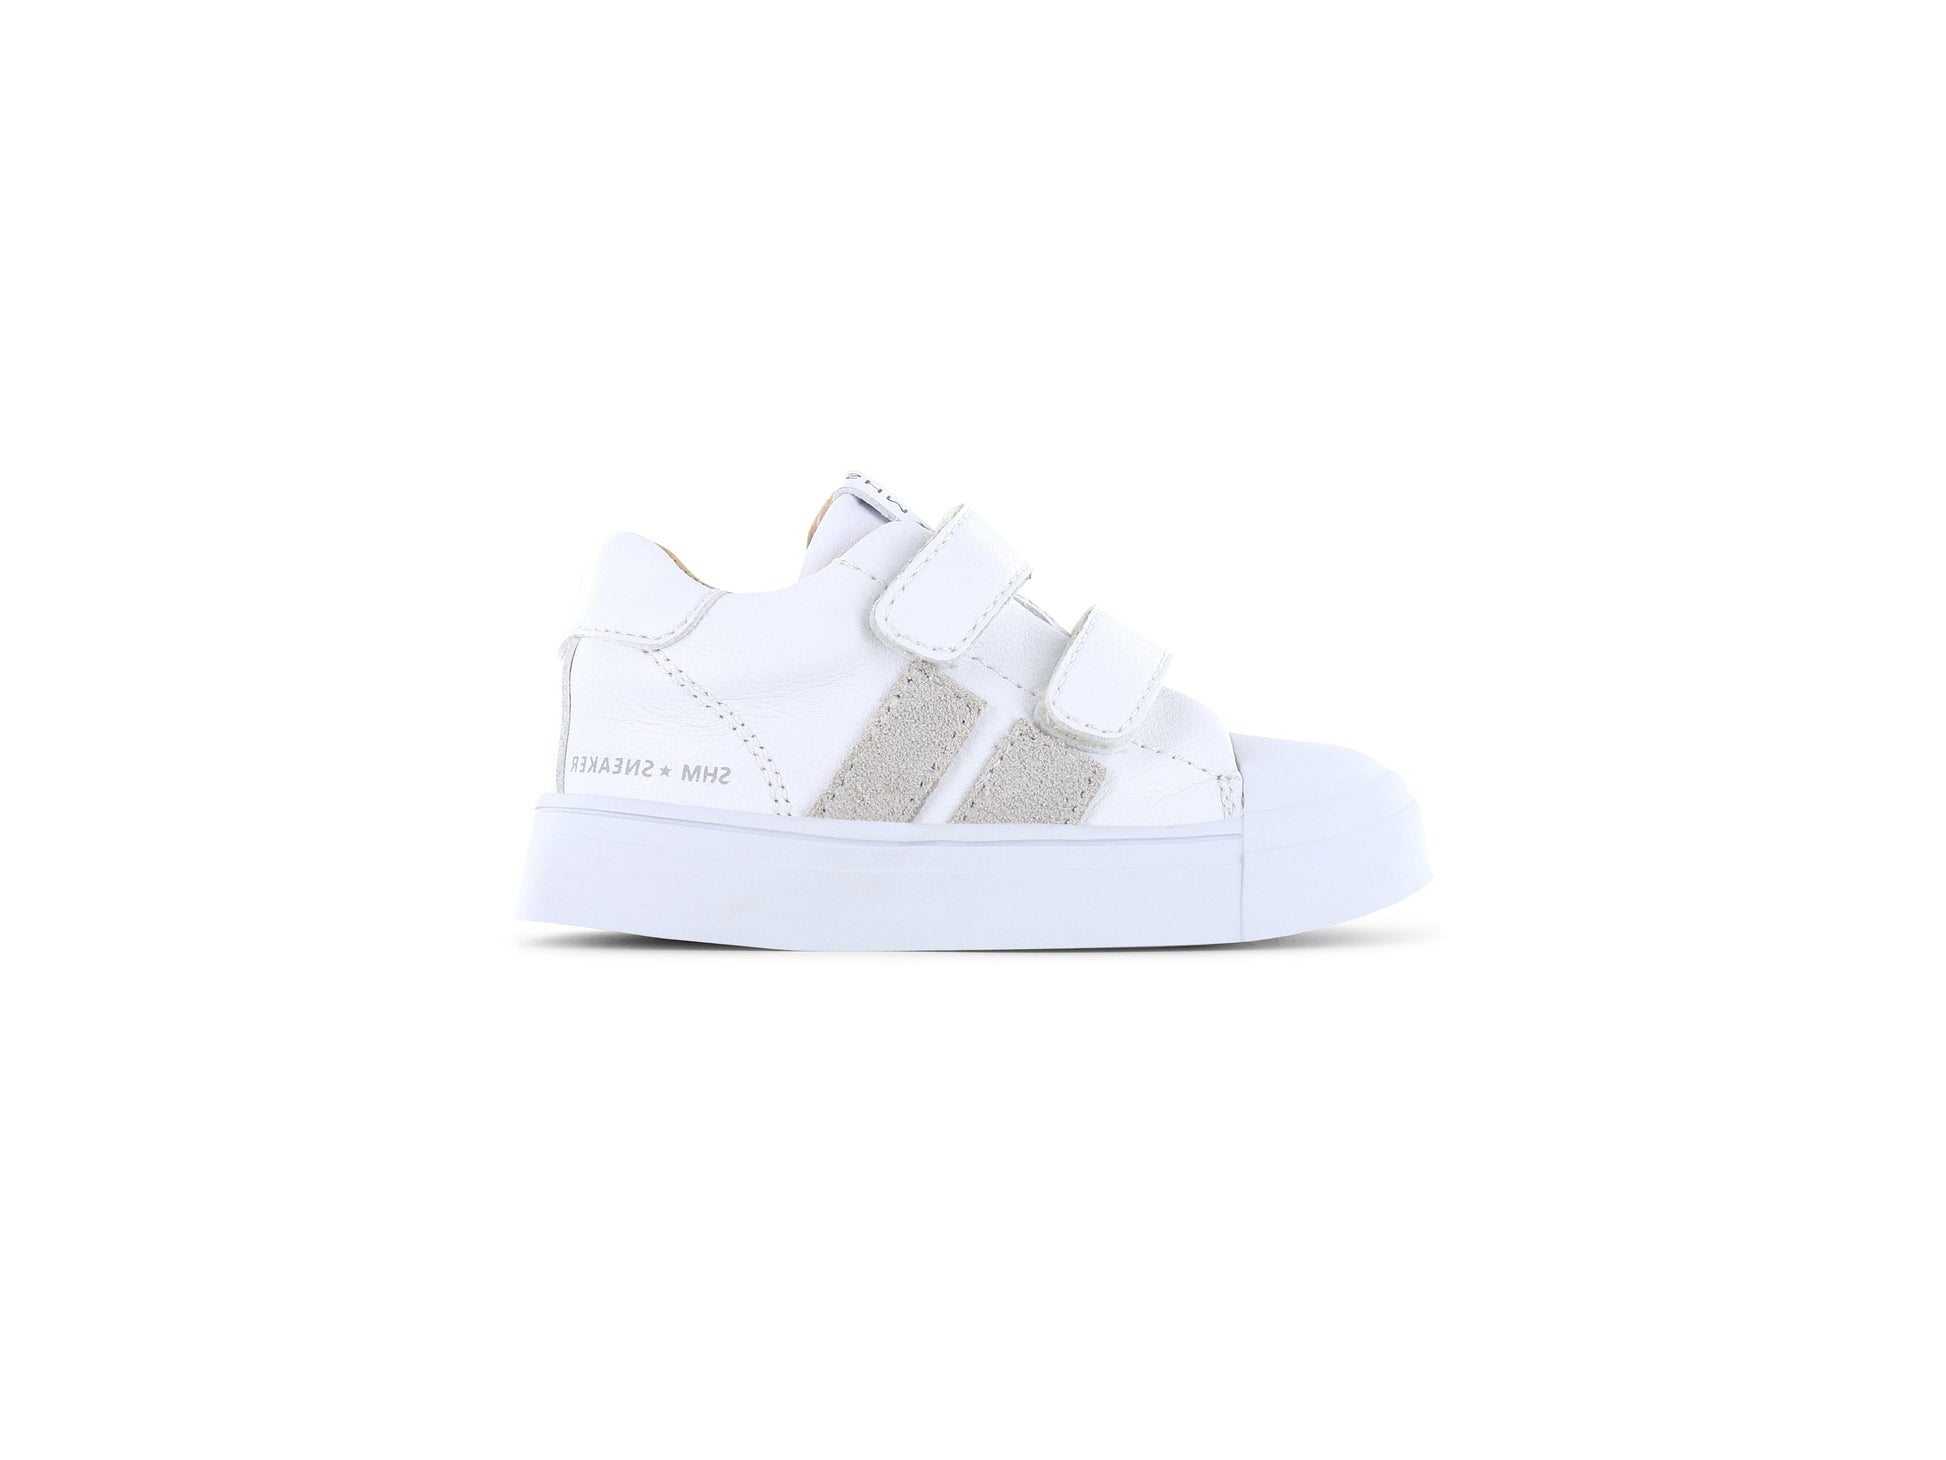 A chunky girl's trainer by Shoesme, style SH24S005-C, in white leather with grey panels to side.
Double velcro fastening.
Right side view.